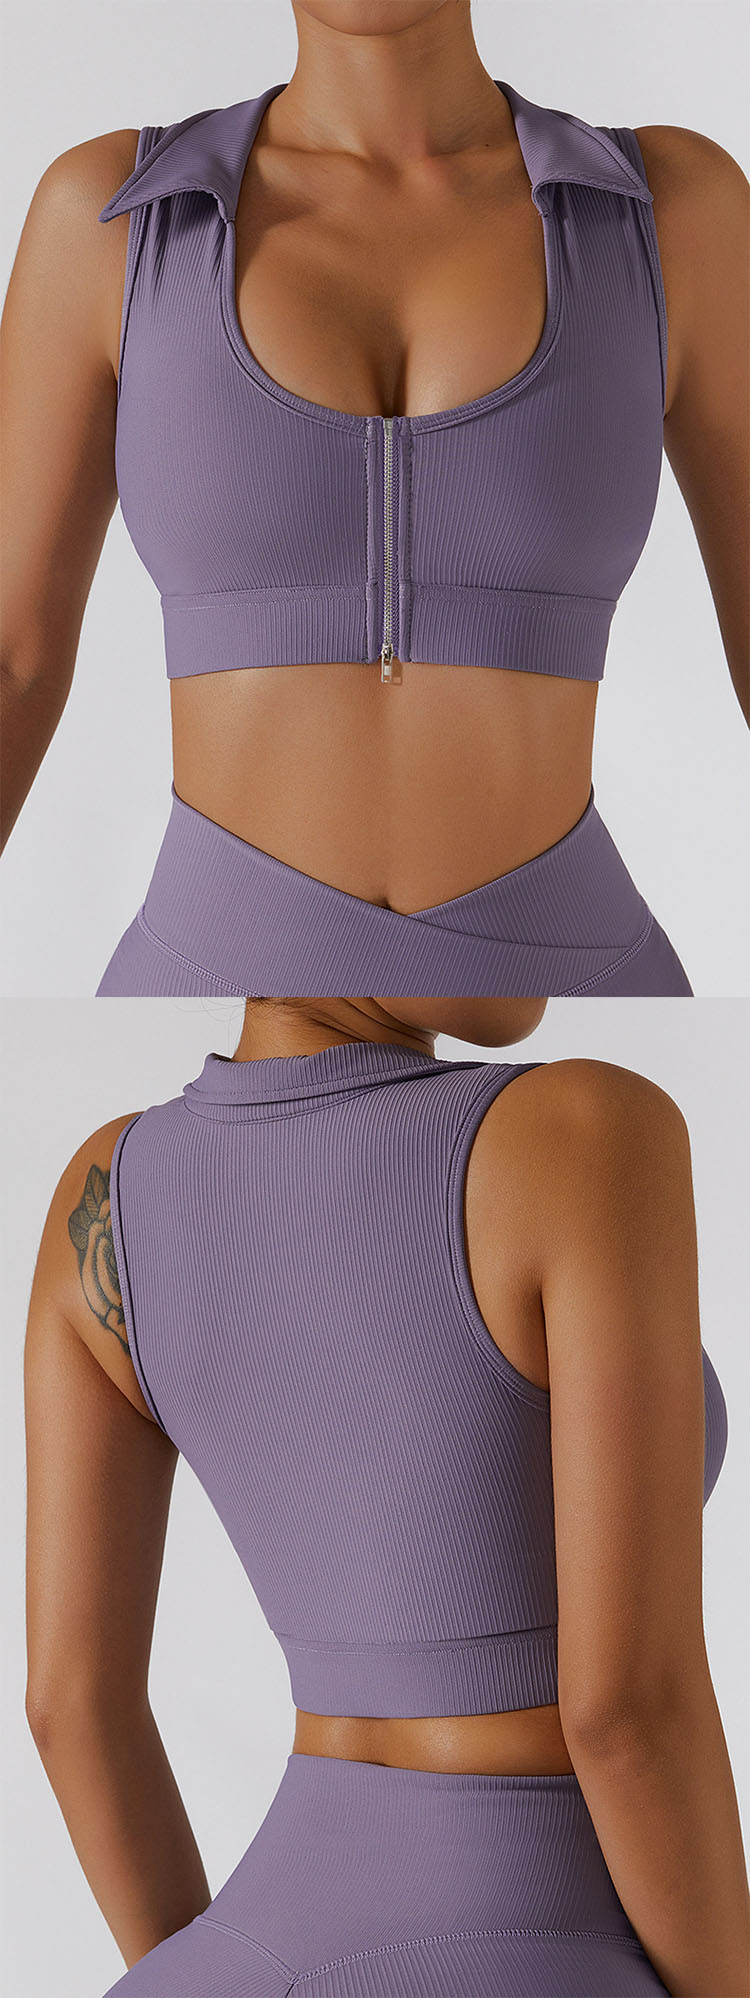 Made of high-quality fabric, it absorbs moisture and wicks sweat and enhances the sports experience